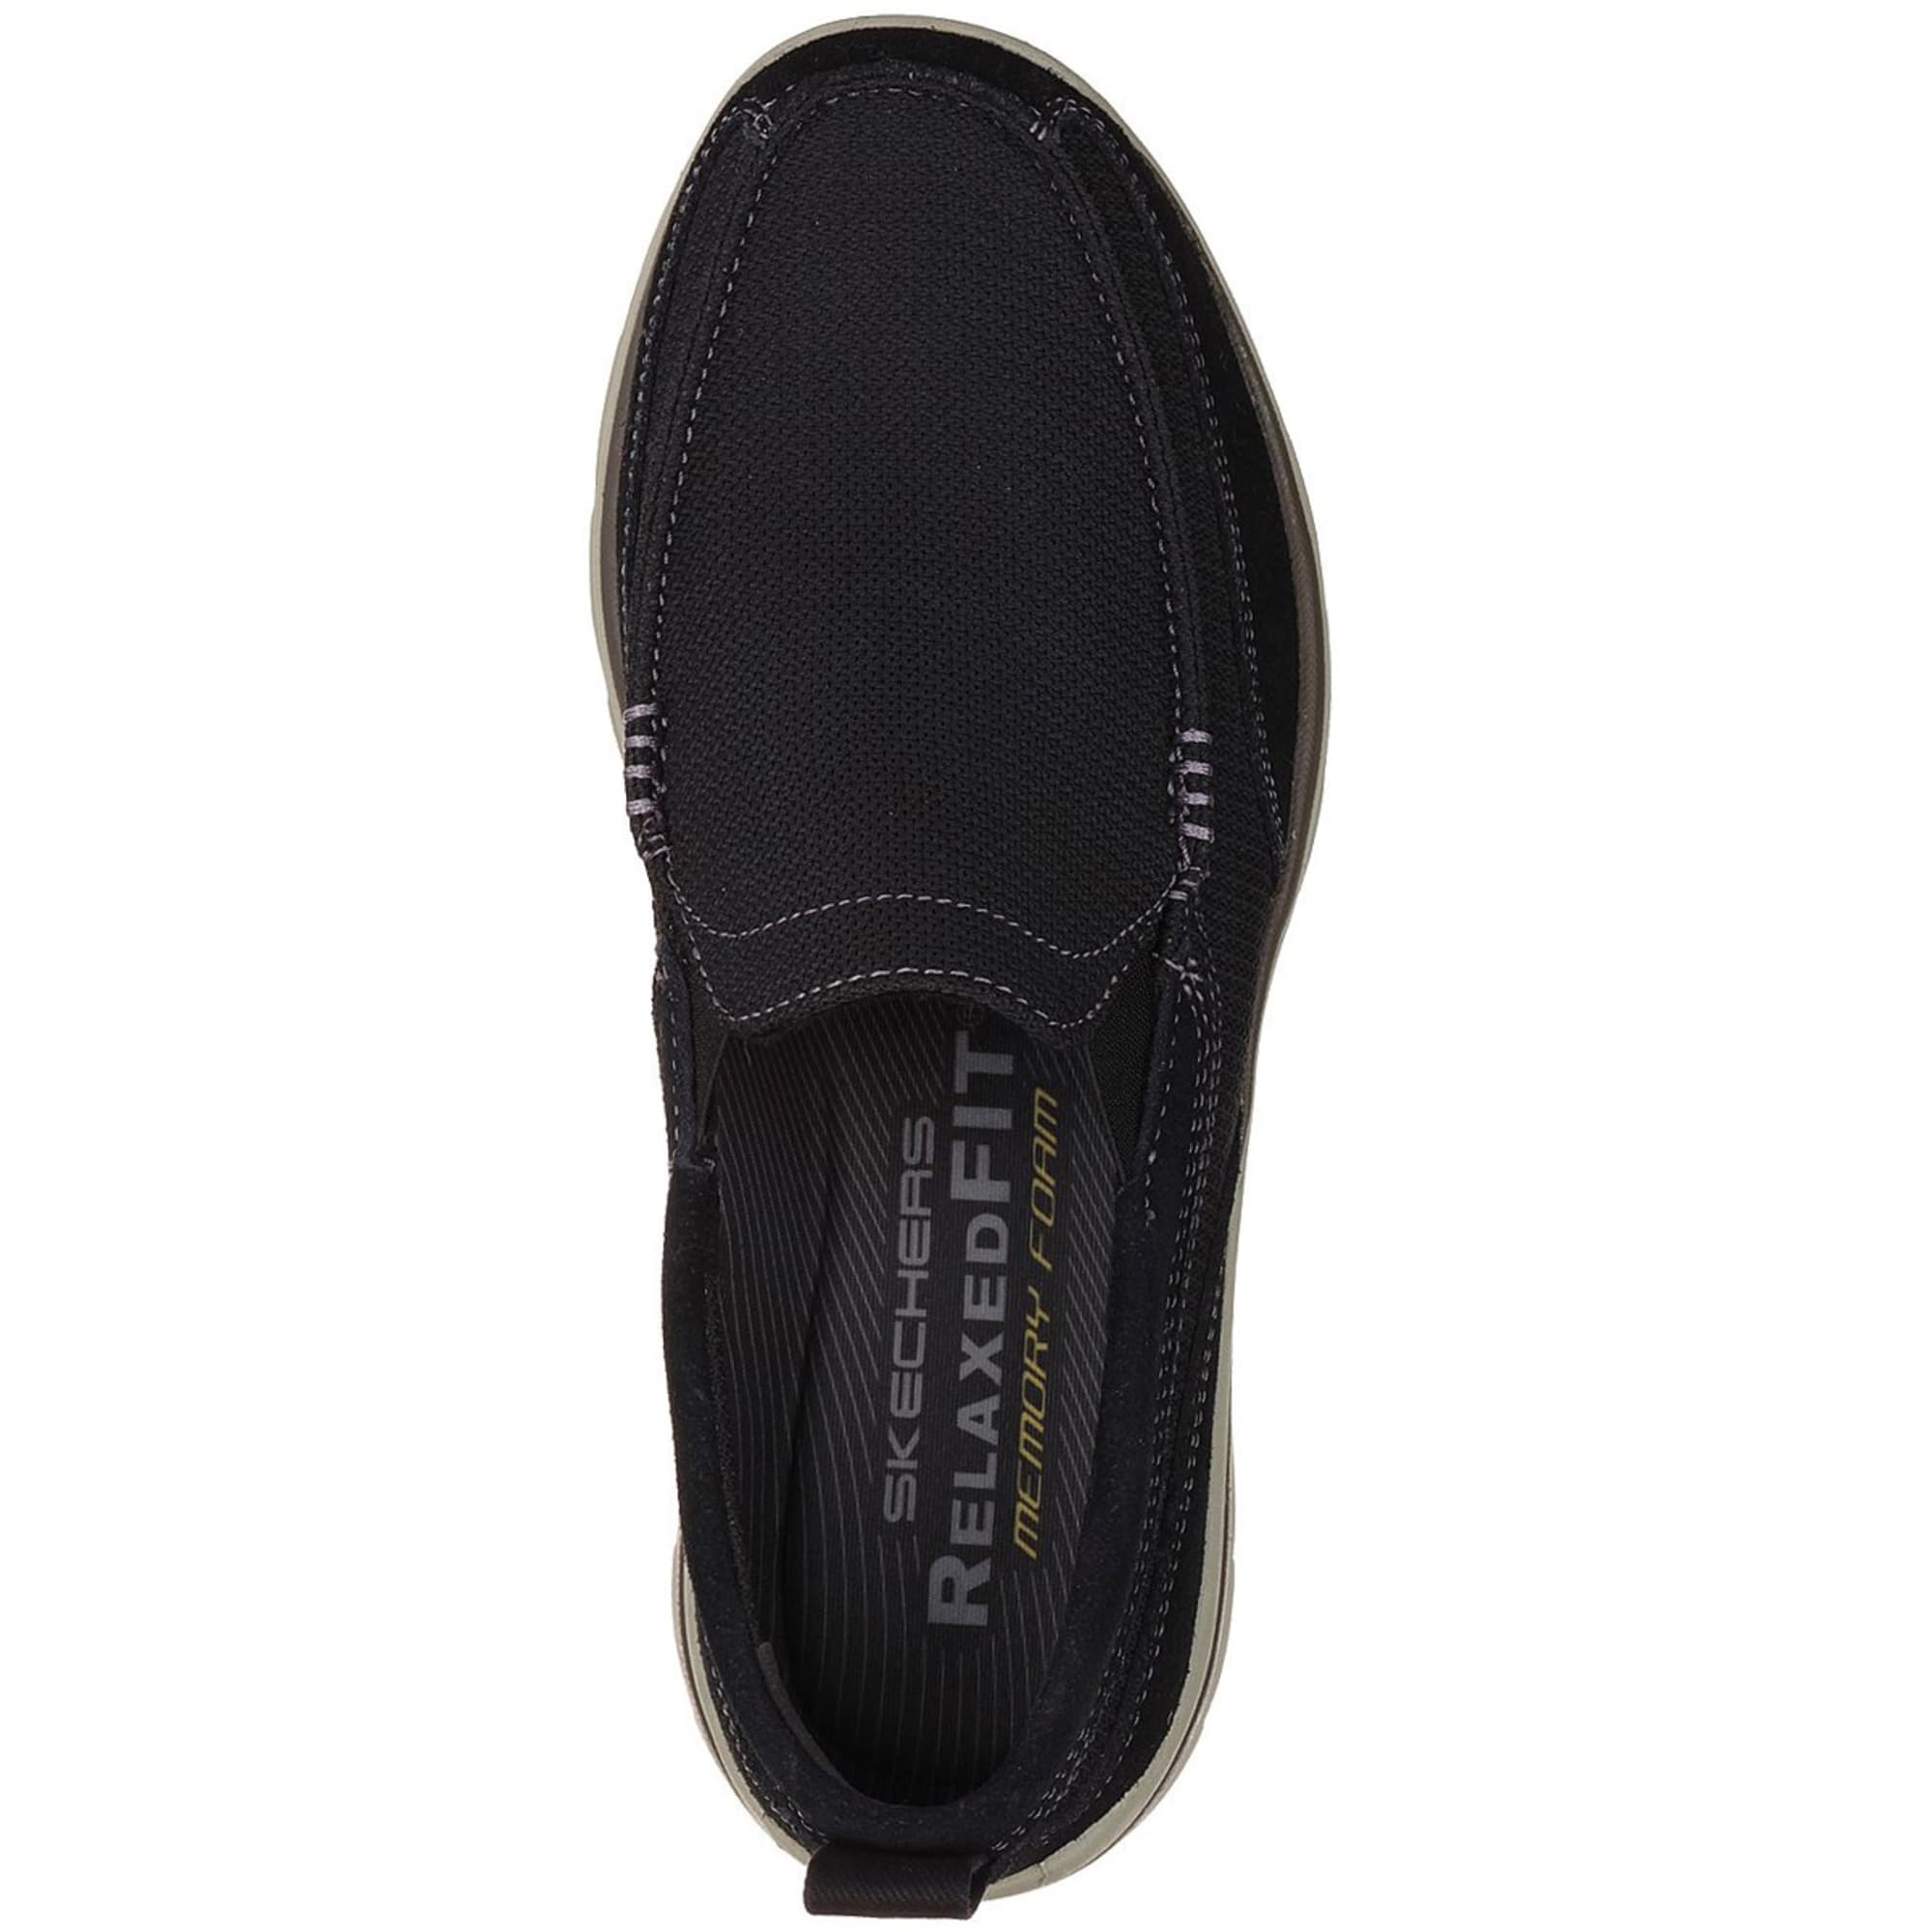 Skechers Men's Relaxed Fit Superior Milford Casual Slip-on Sneaker